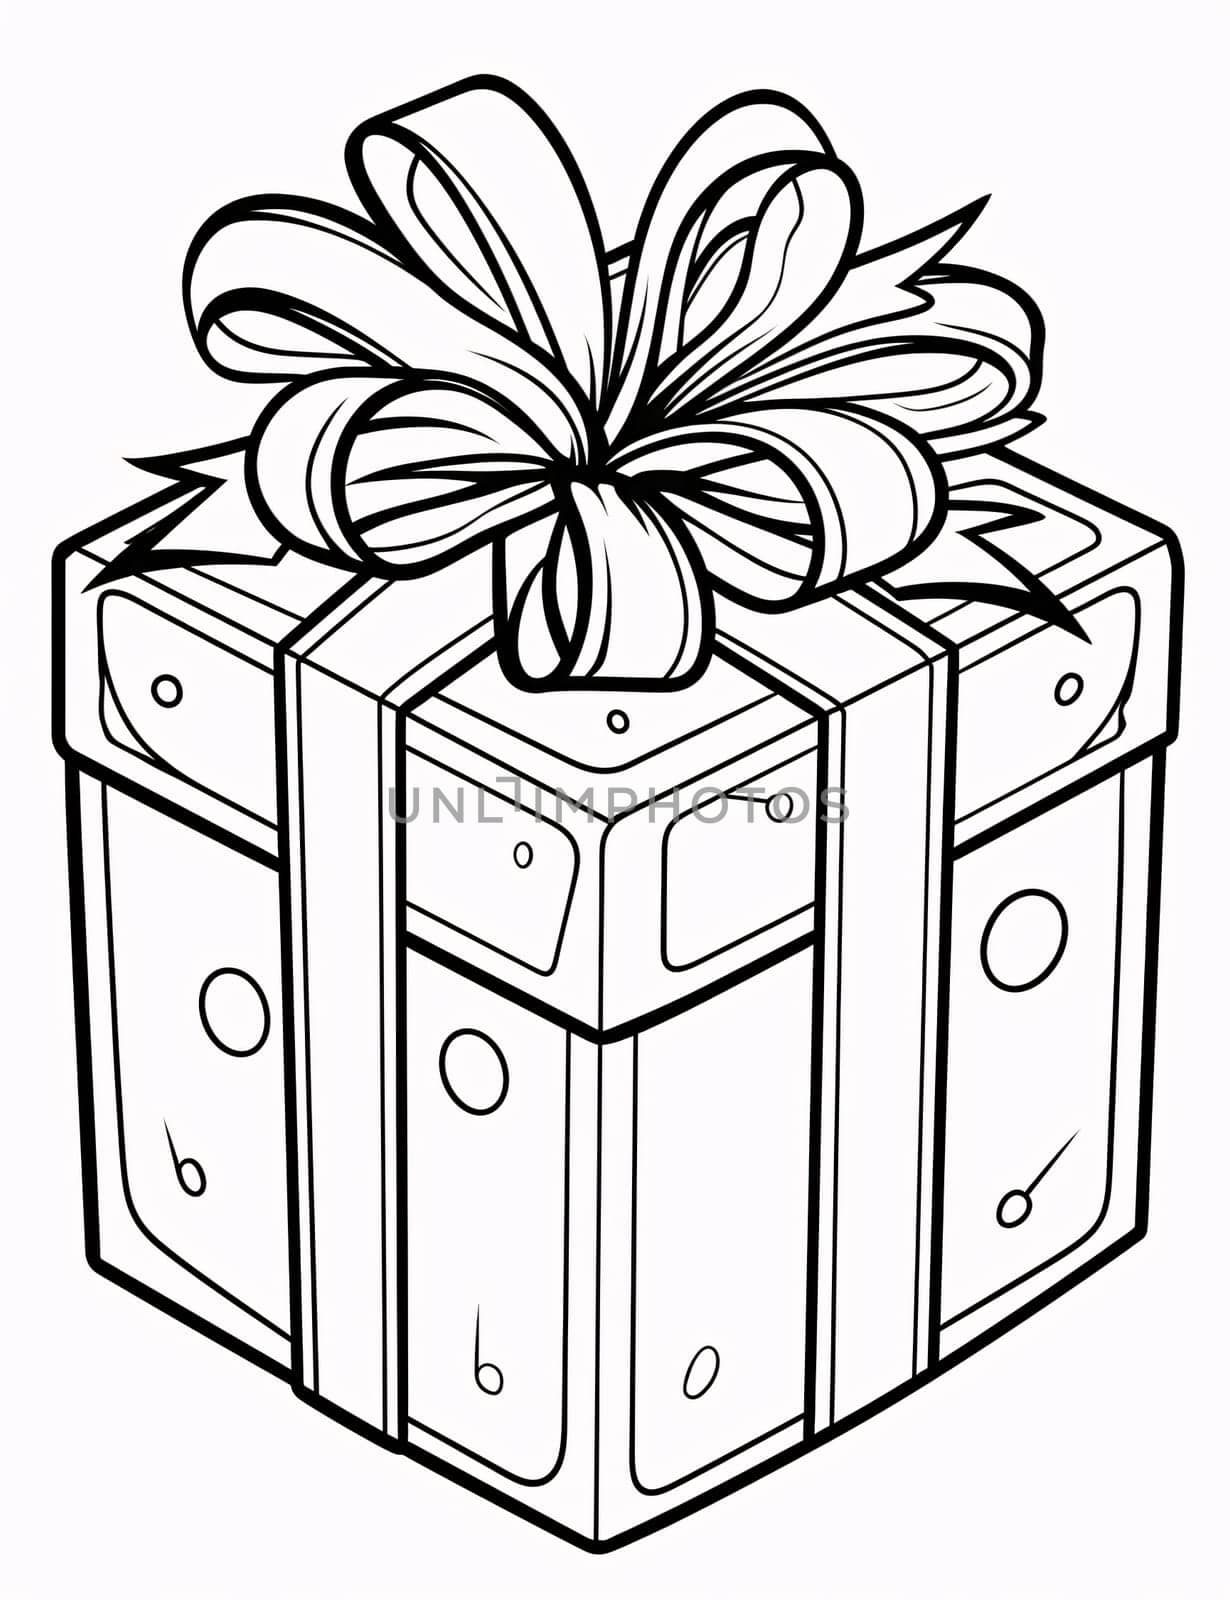 Black and white coloring card; gift with a bow. Gifts as a day symbol of present and love. by ThemesS